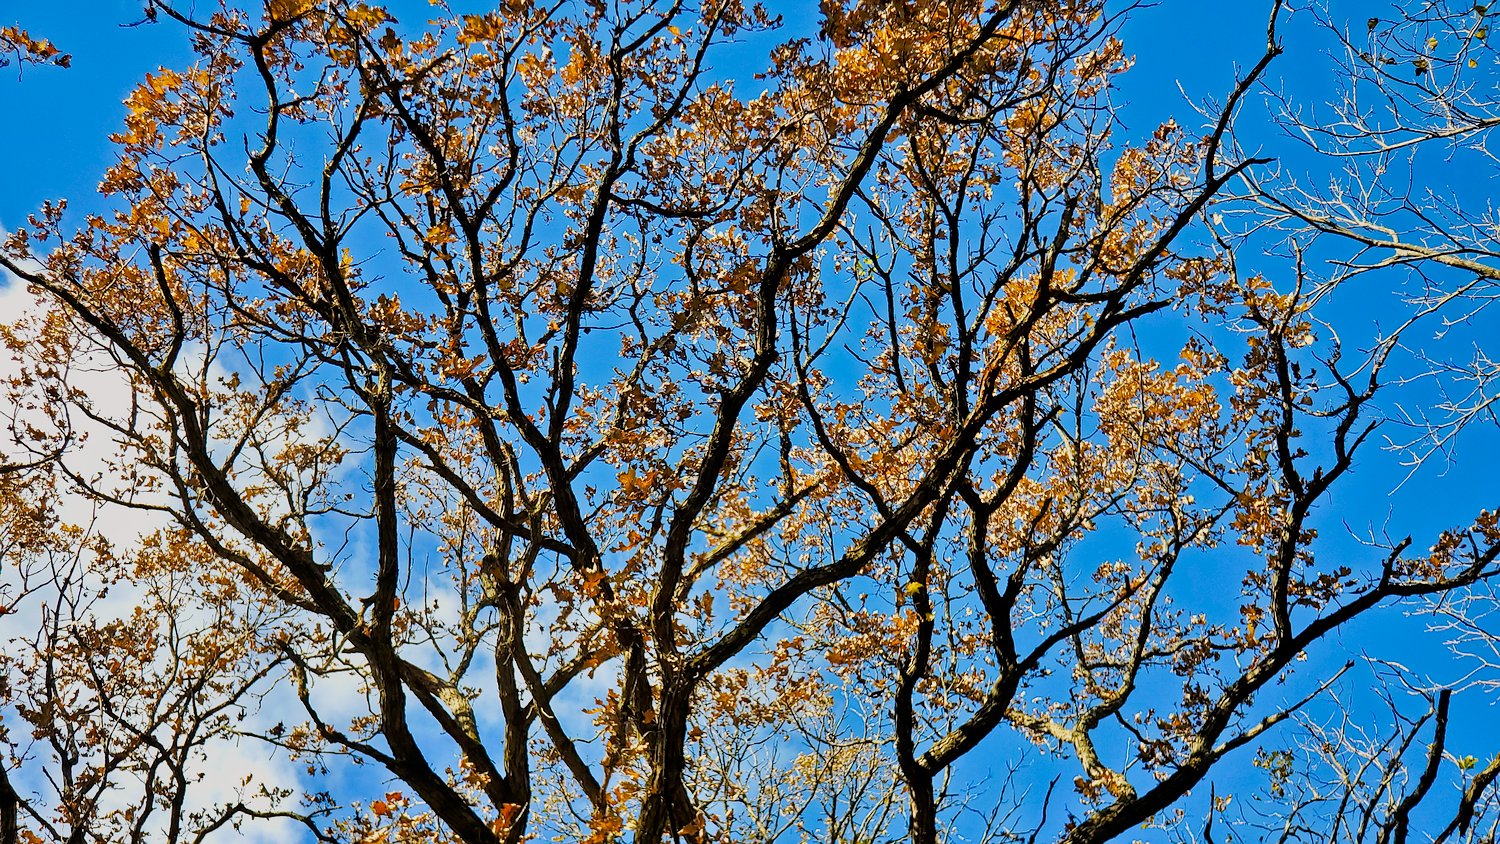 Tan leaves against the blue sky at Rush Creek Conservation Area.